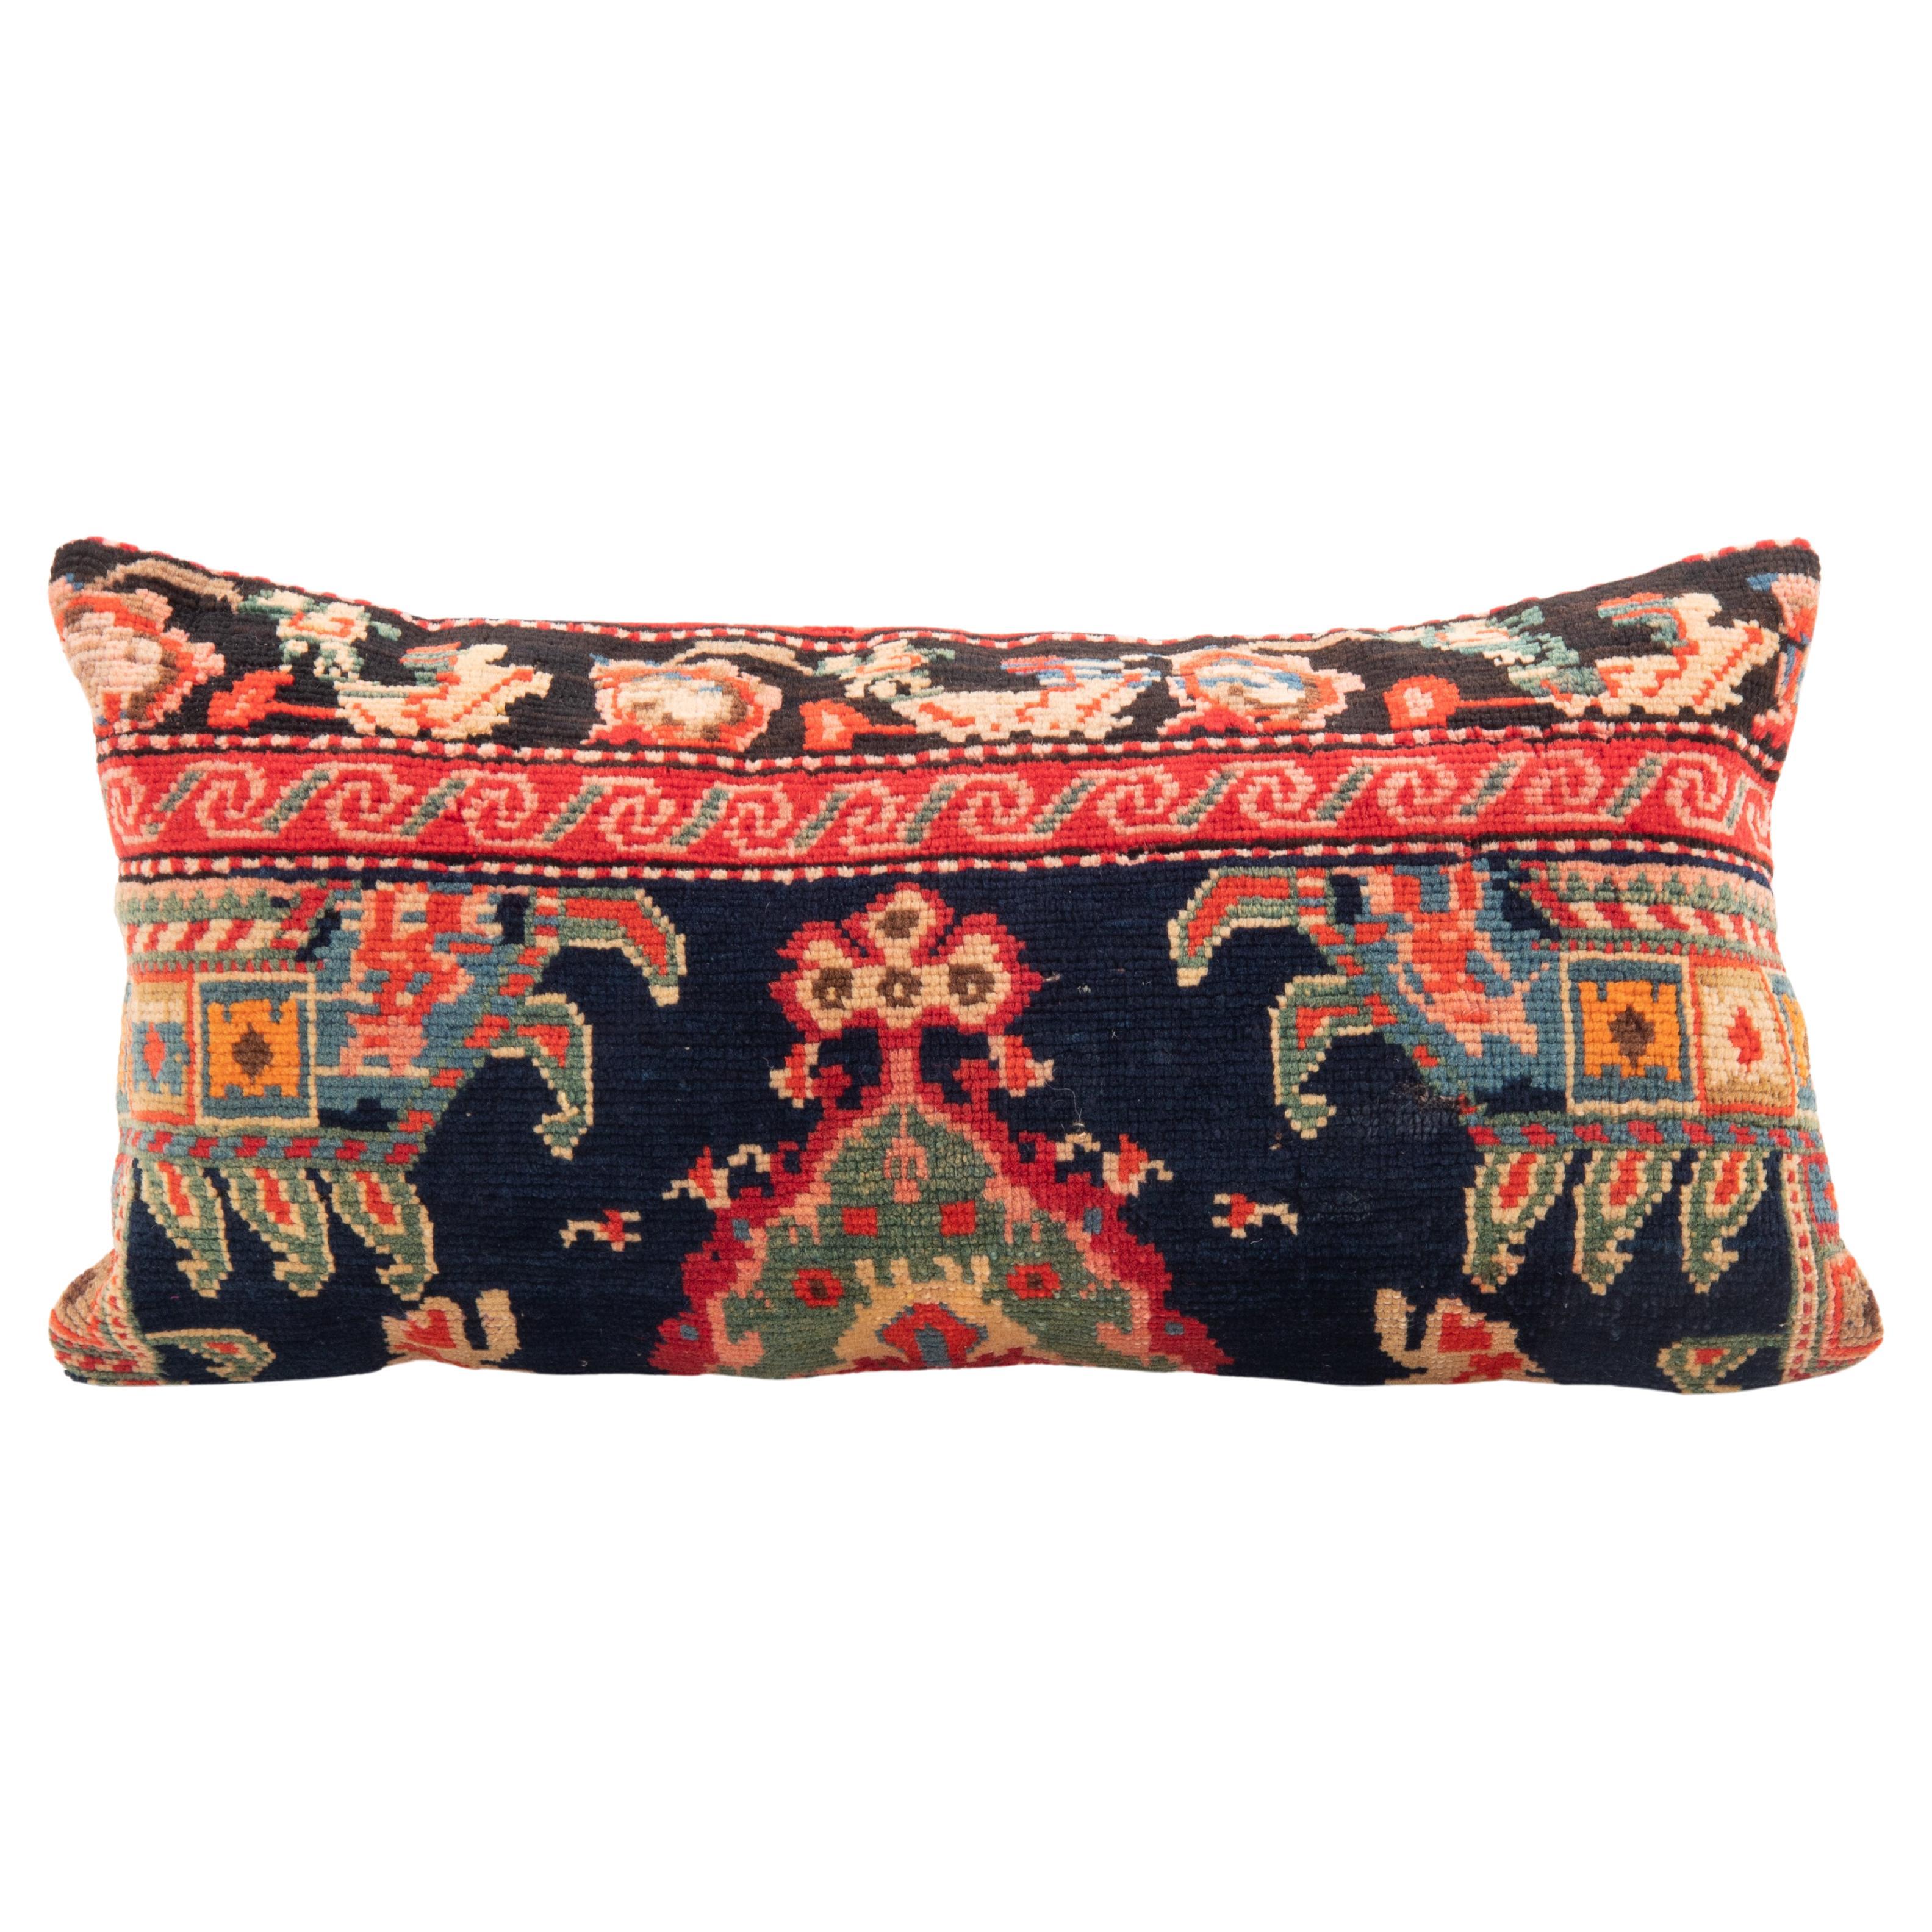 Pillow Cover Made from a Caucasian Karabagh Rug, late 19th / Early 20th C.